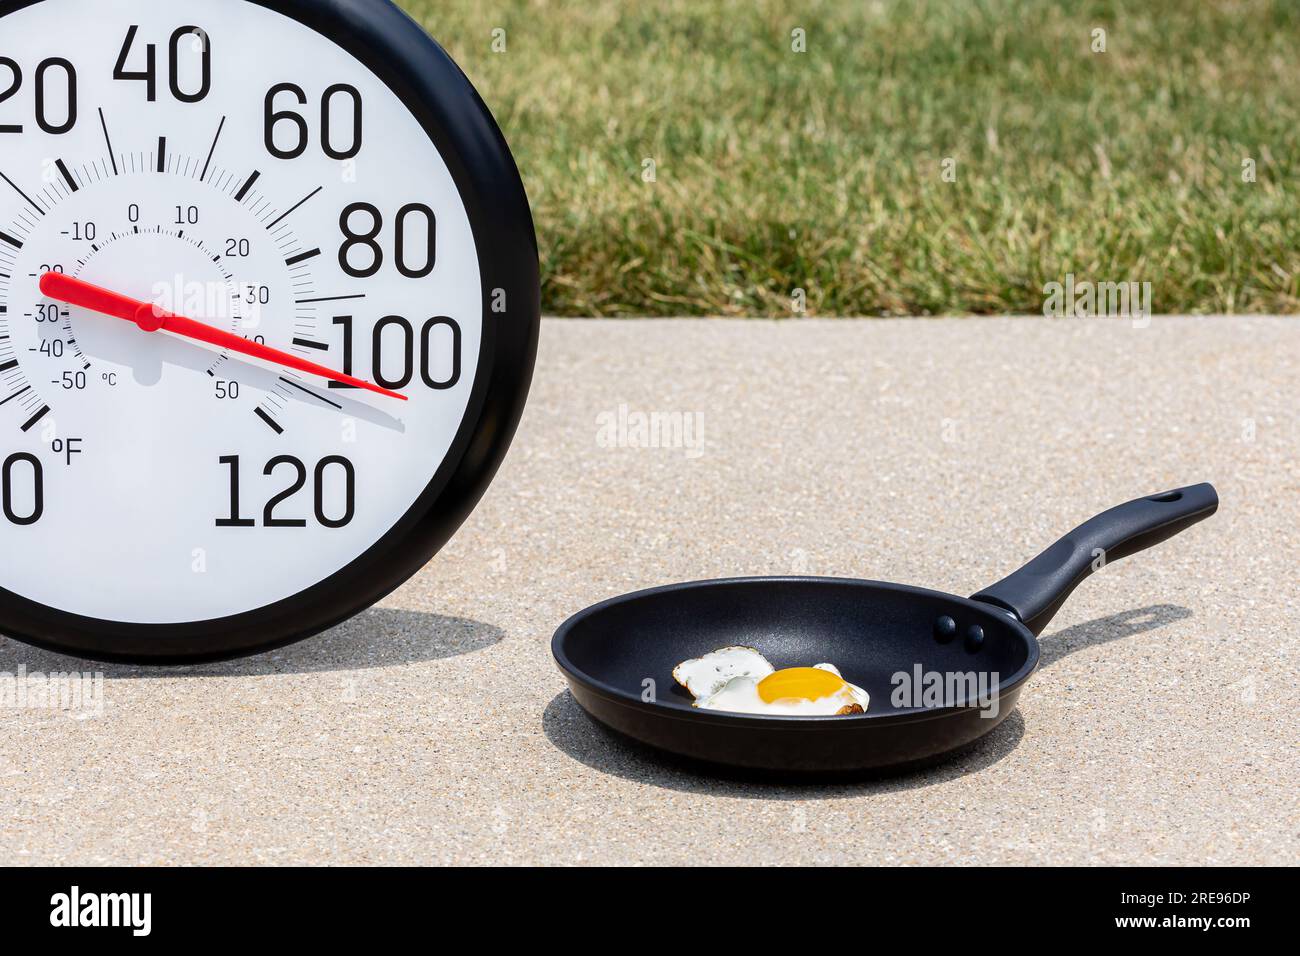 https://c8.alamy.com/comp/2RE96DP/cooking-egg-on-sidewalk-with-thermometer-in-the-sun-during-heatwave-hot-weather-high-temperature-and-heat-warning-concept-2RE96DP.jpg